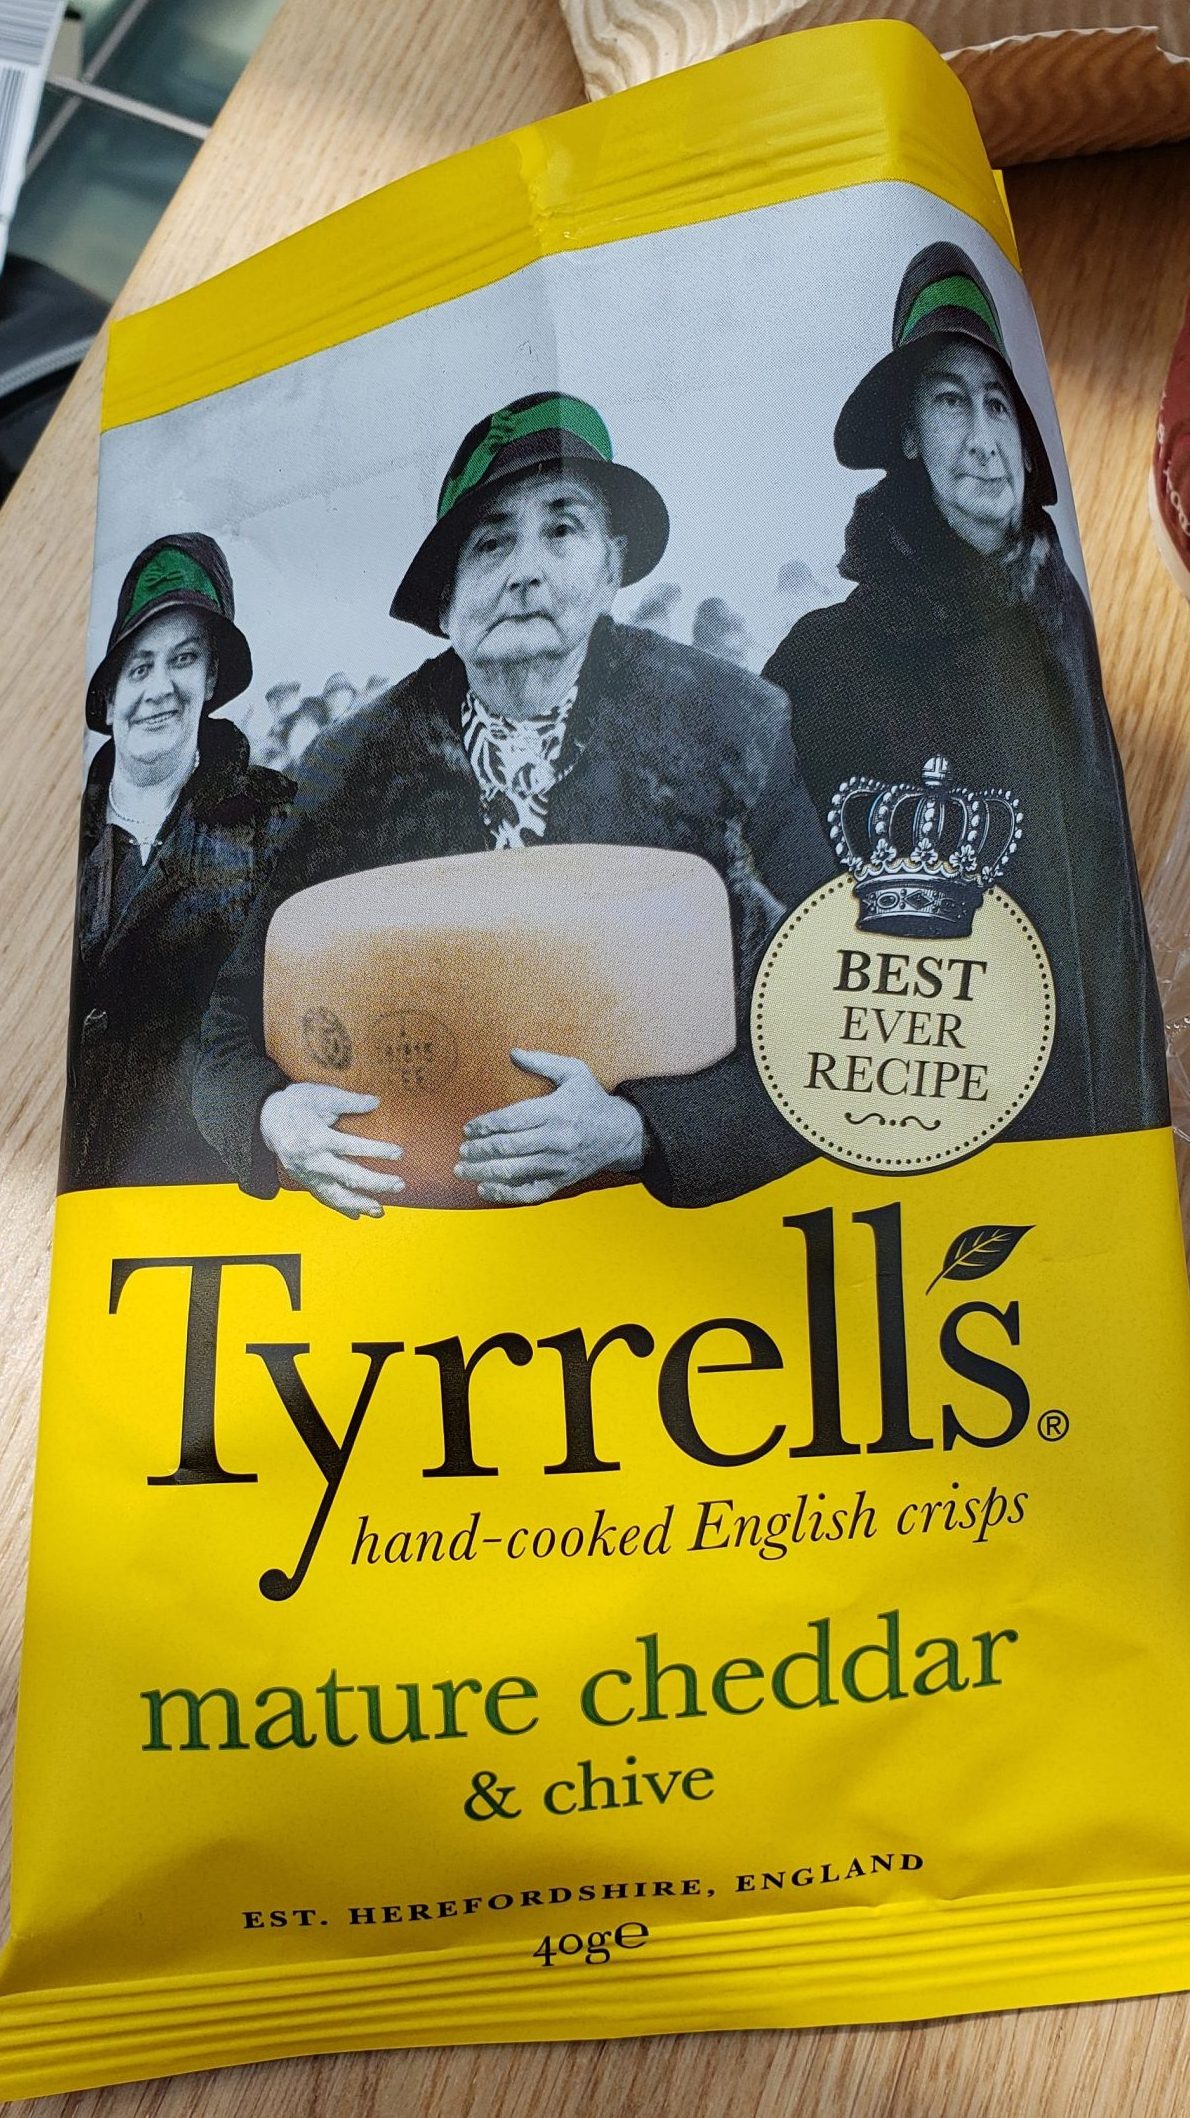 Potato chip bag highlighting a black and white photo of moderately grumpy old women holding a wheel of cheese